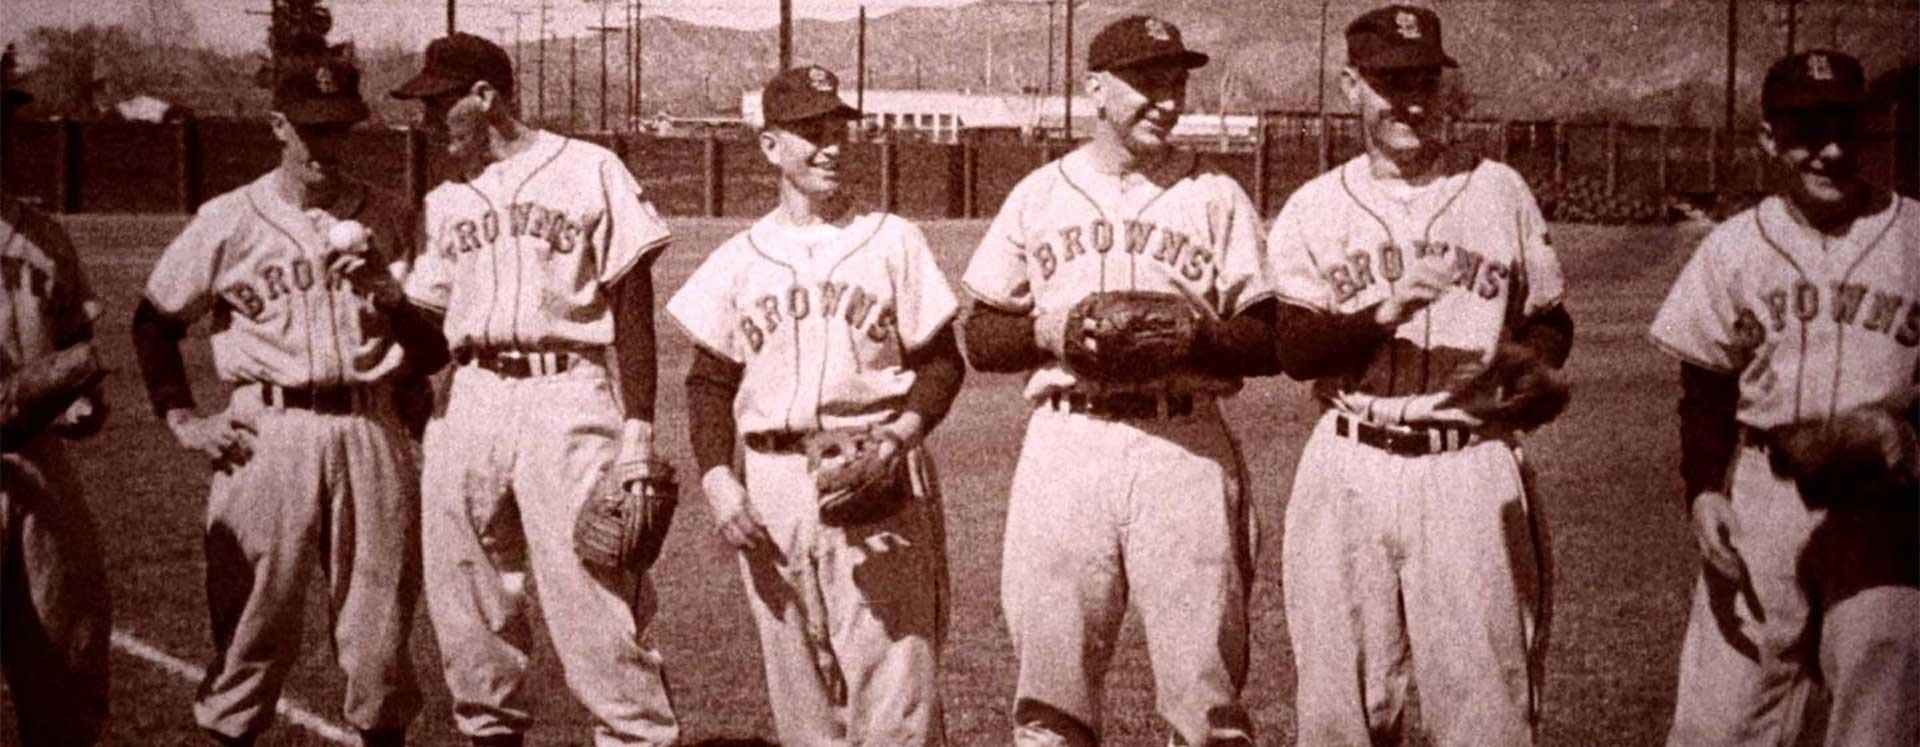 The famous world beaters St. Louis Browns